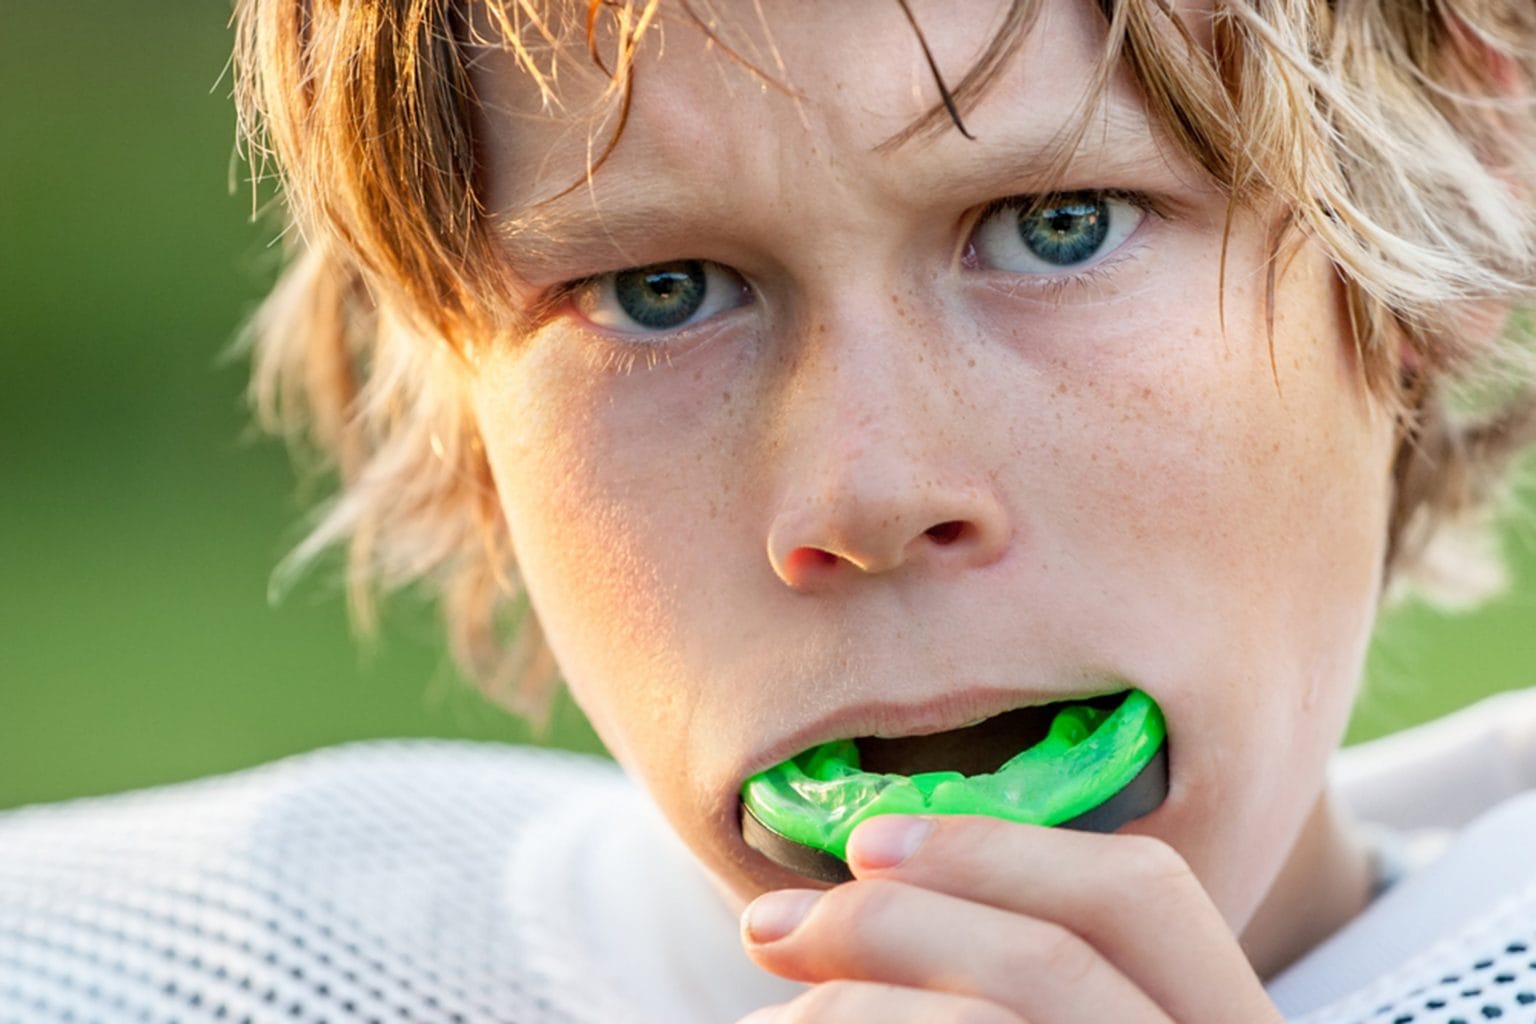 mouthguards are essential athletic equipment